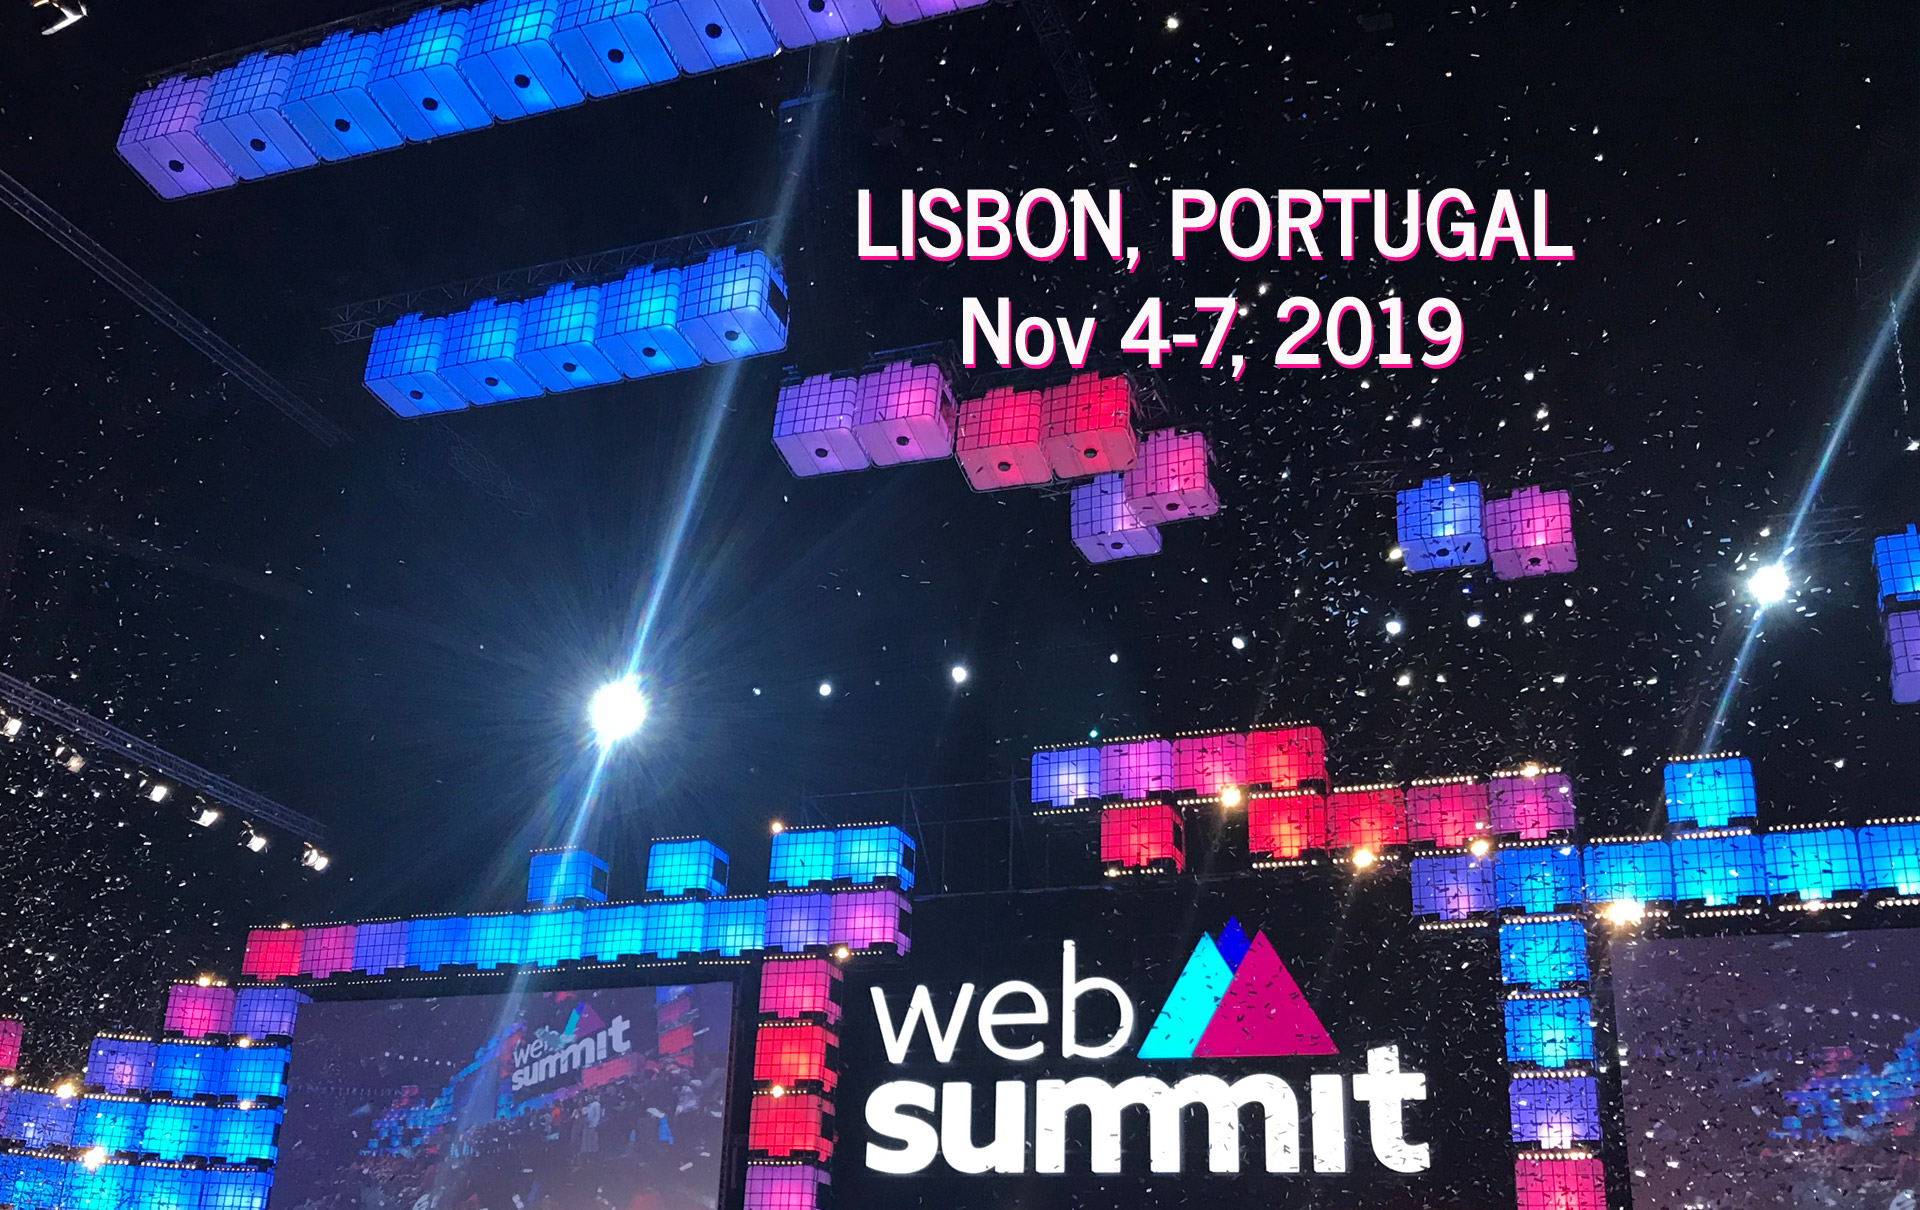 Web Summit 2019 Lisbon Portugal Nov 4-7 The World's Largest Tech Conference